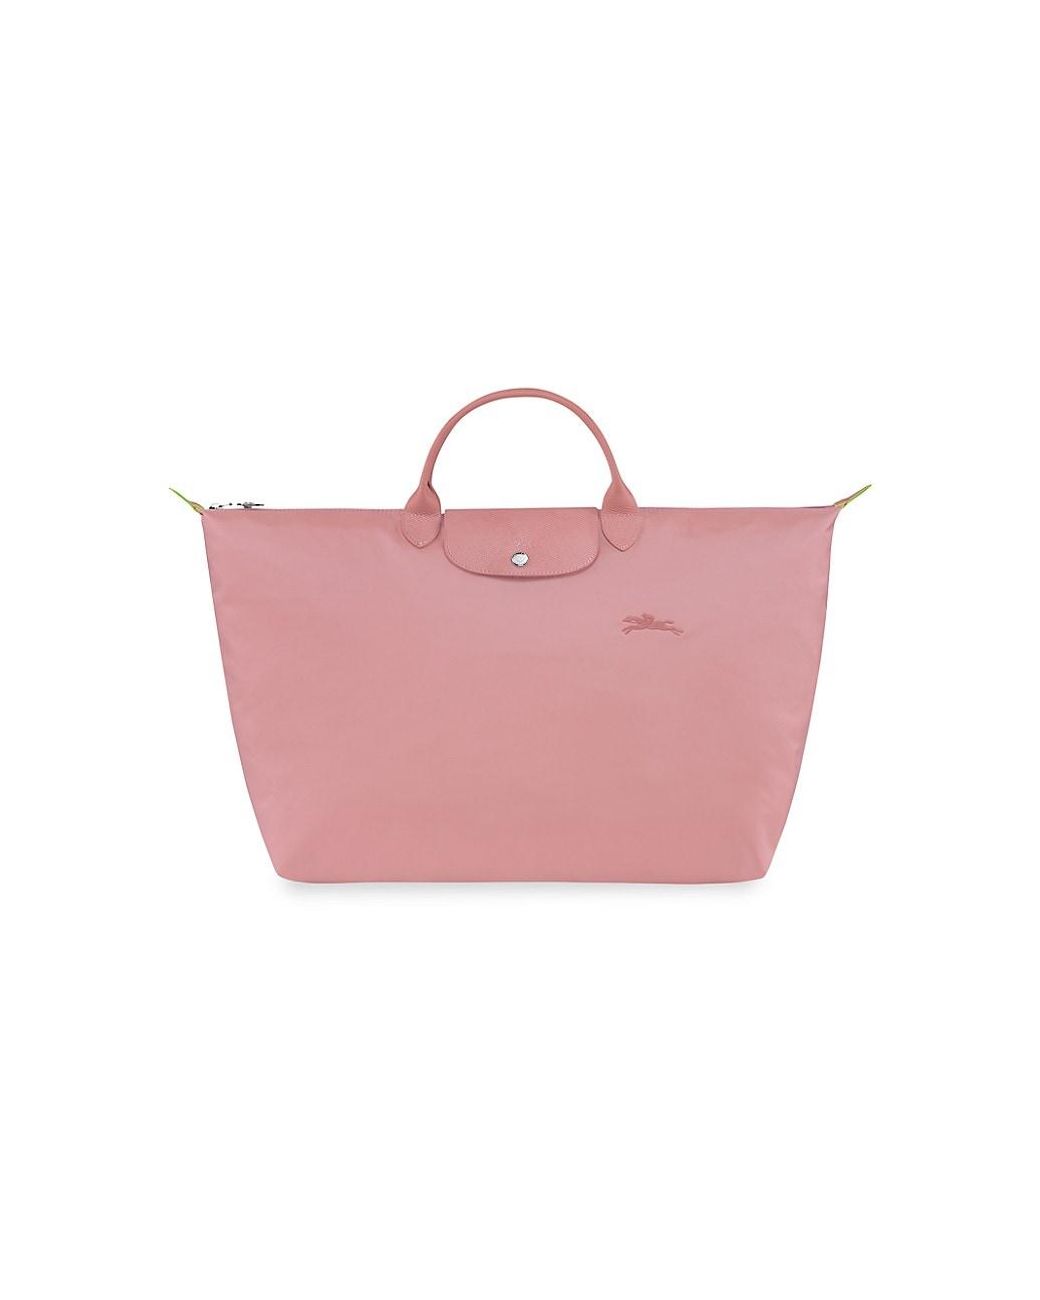 Longchamp Large Le Pliage Green Travel Bag in Pink | Lyst